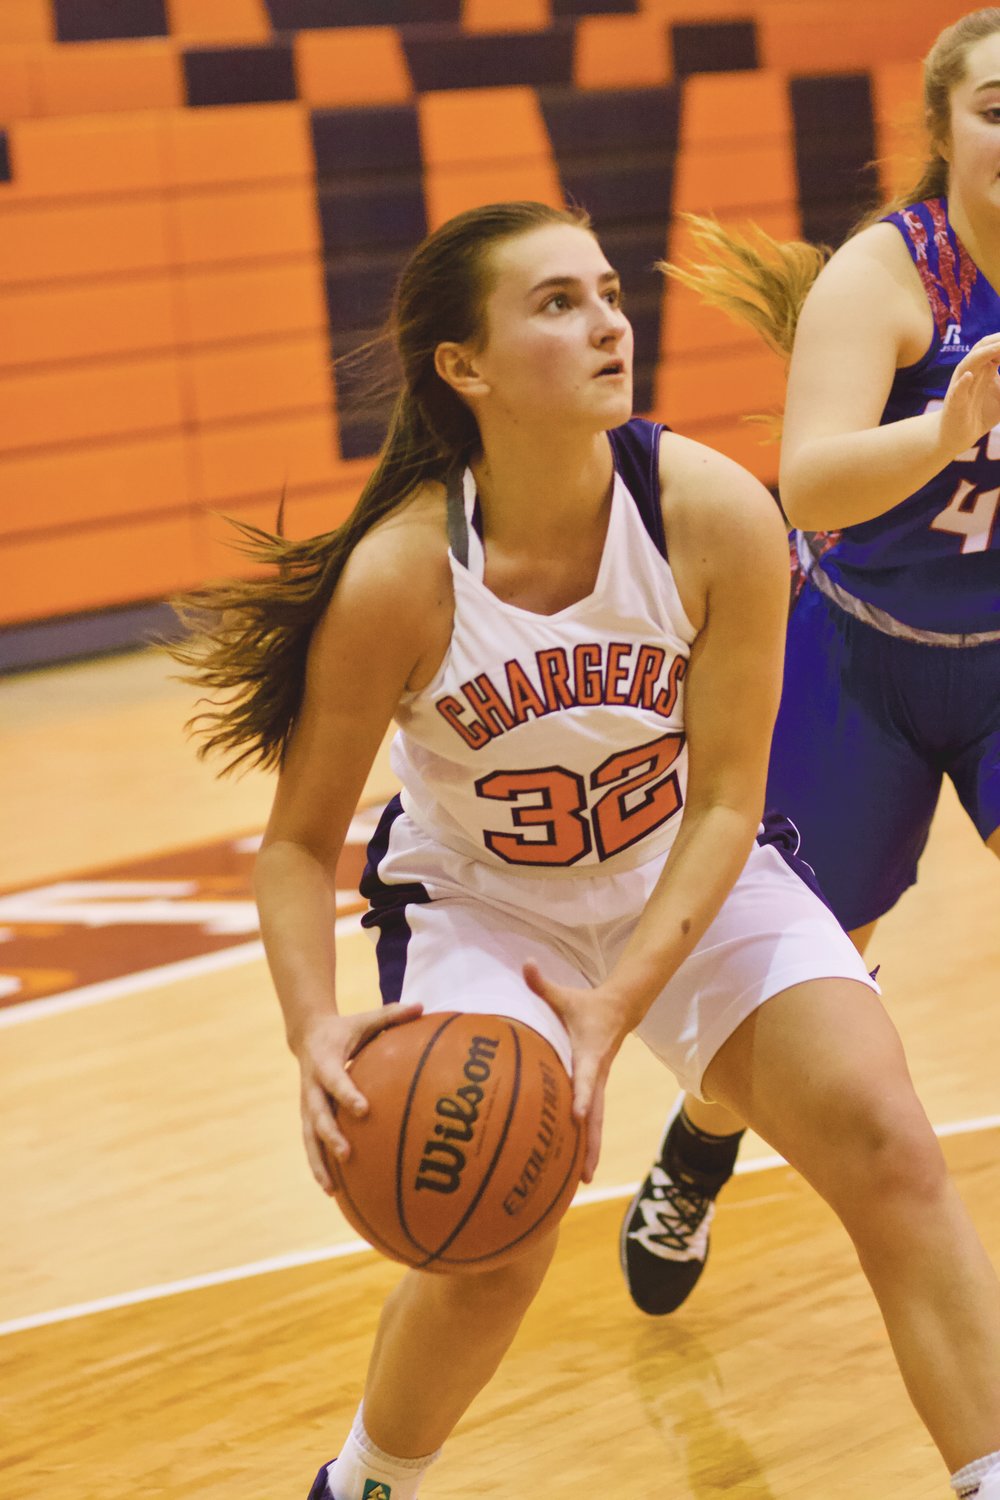 North Montgomery senior Emily Sennett scored 12 points in the Chargers 54-28 win over Elwood on Tuesday.